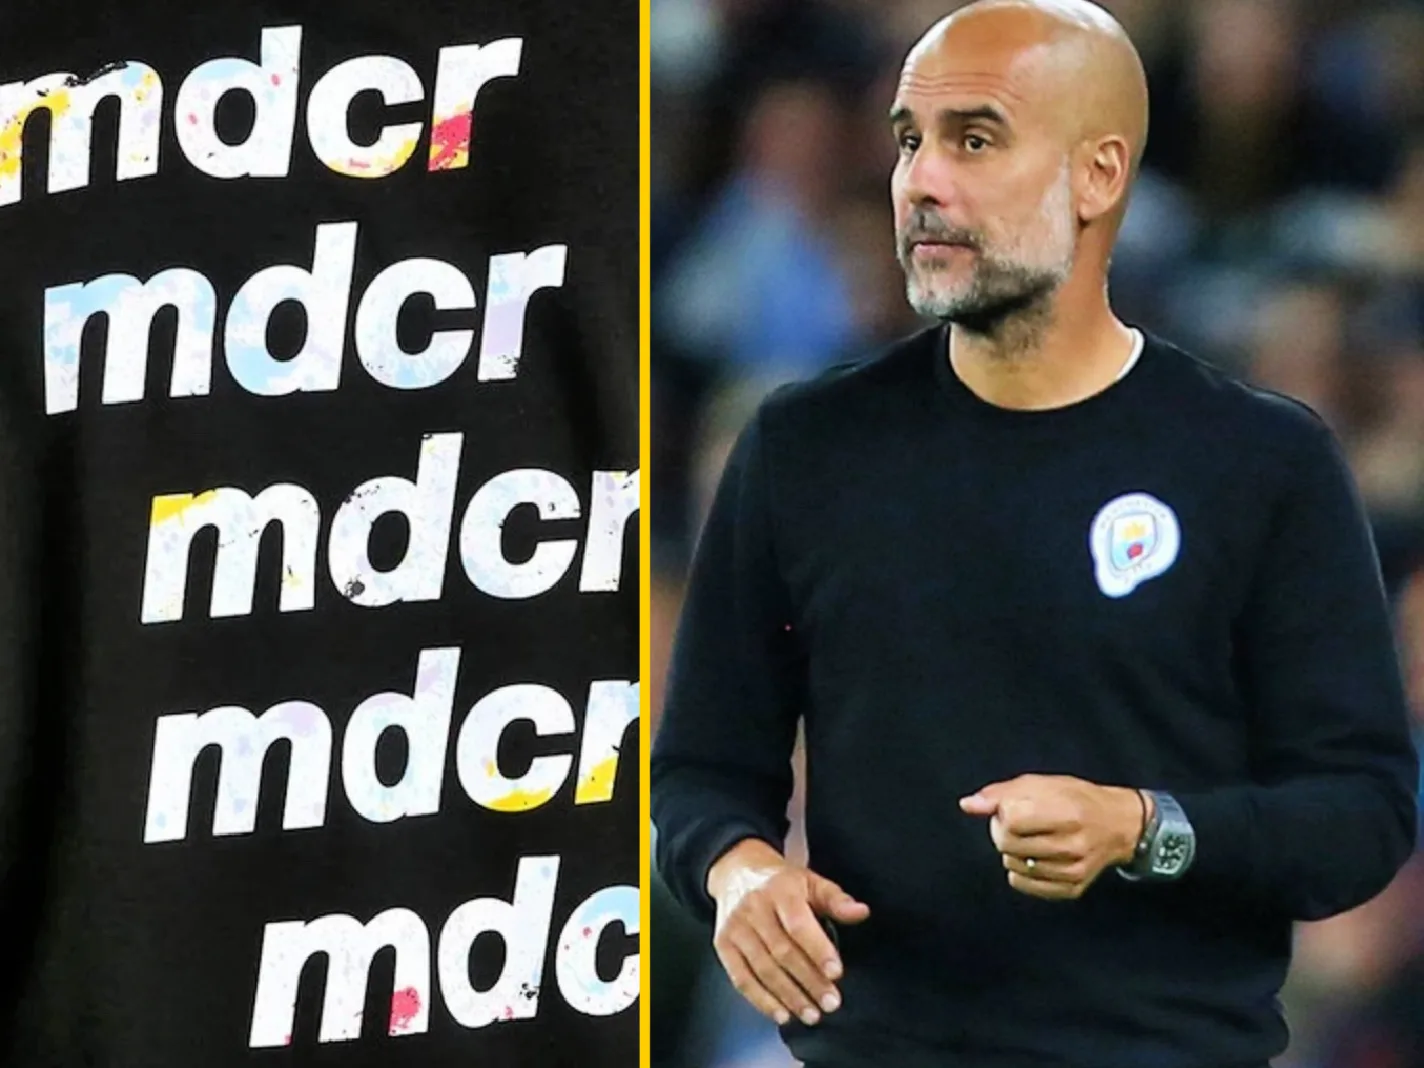 Man City manager Pep Guardiola rocks 'Madchester' get up vs Chelsea